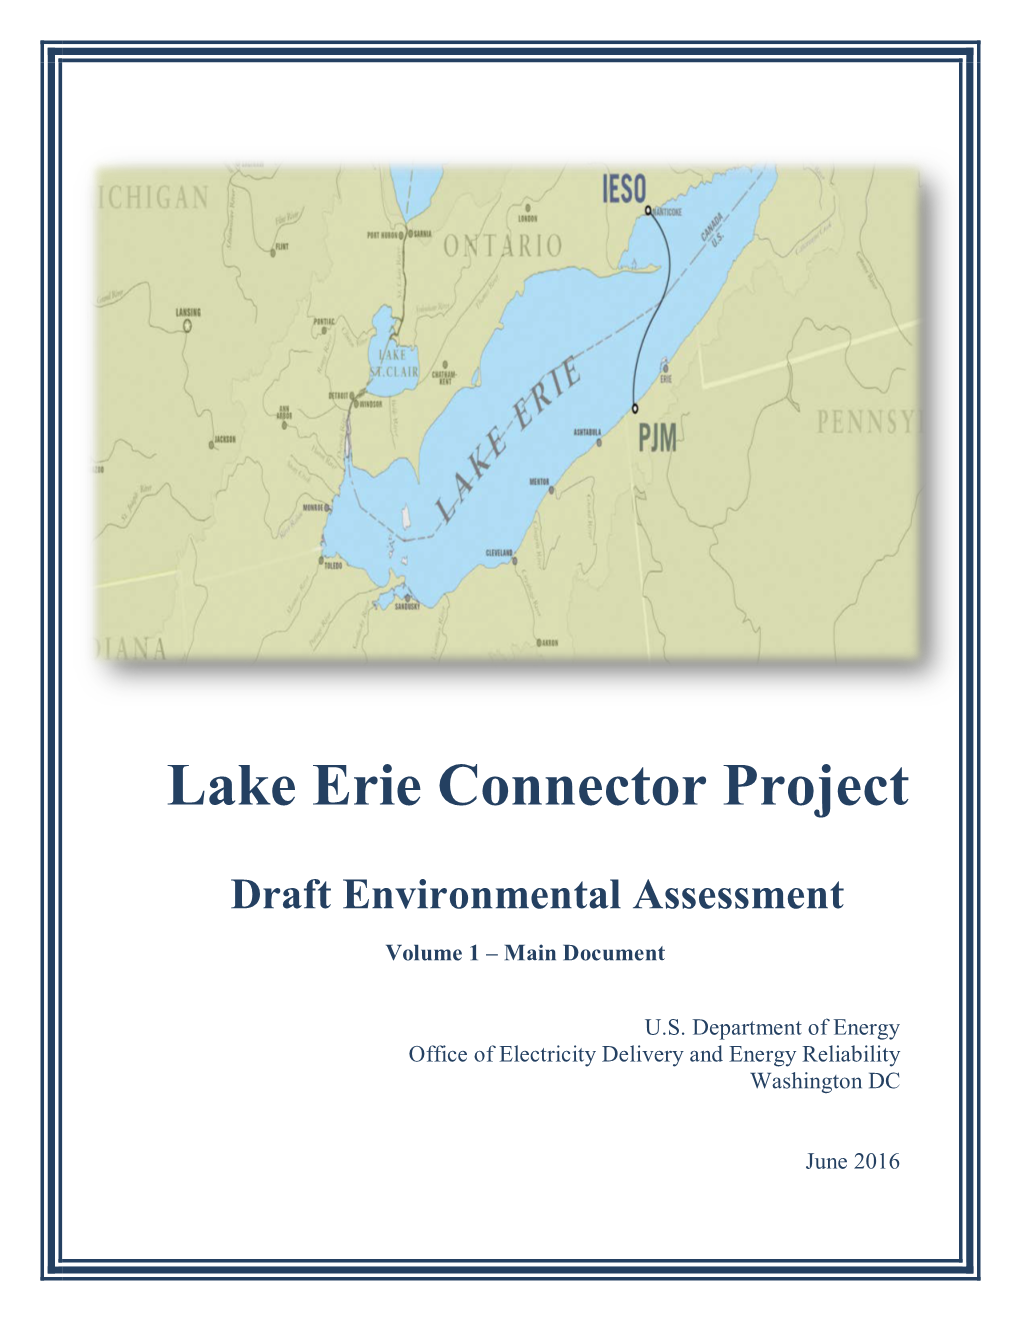 Lake Erie Connector Project Environmental Assessment Draft